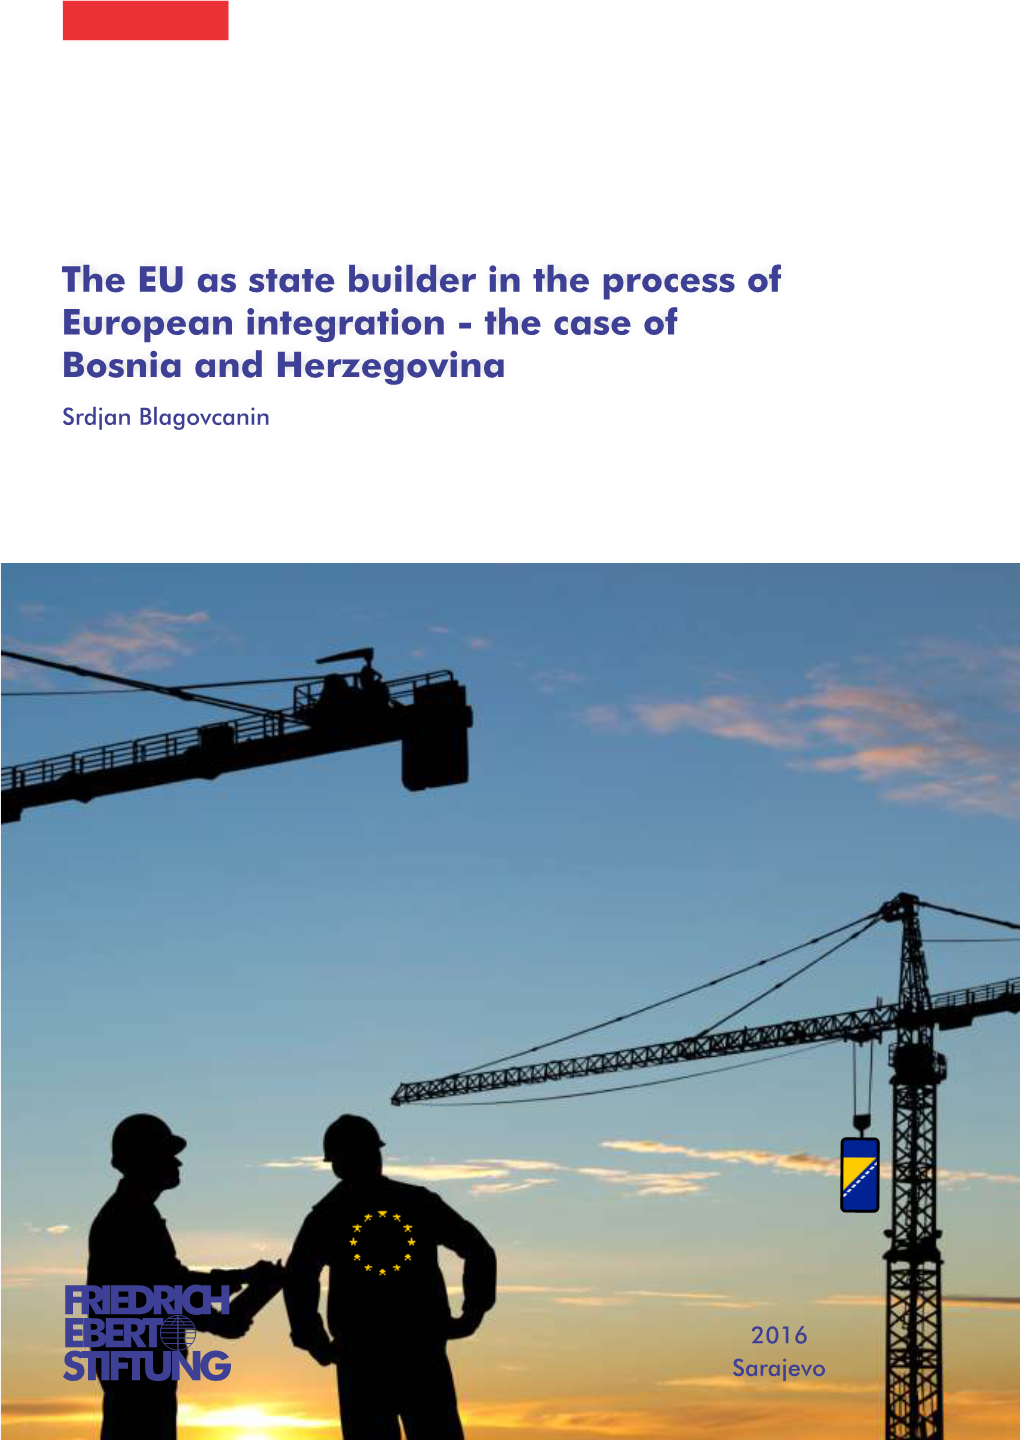 The EU As State Builder in the Process of European Integration